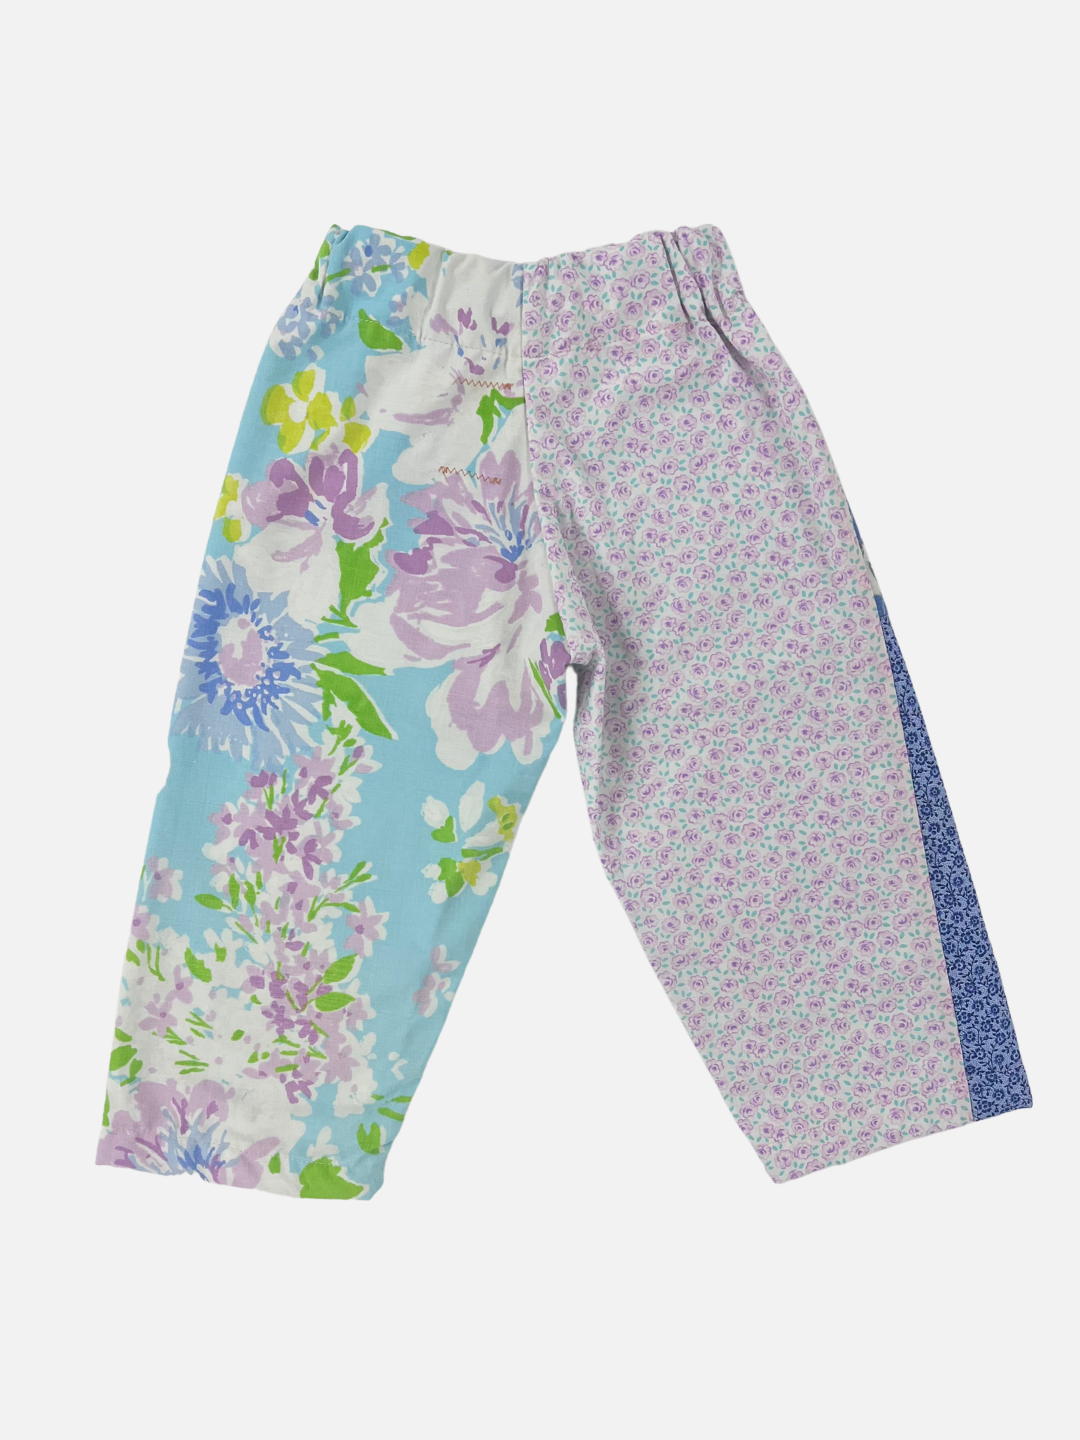 Front view of kid's patchwork pant. Left leg - small flowers on blue, big pink and blue flowers. Right Leg - Flowers on light blue background.